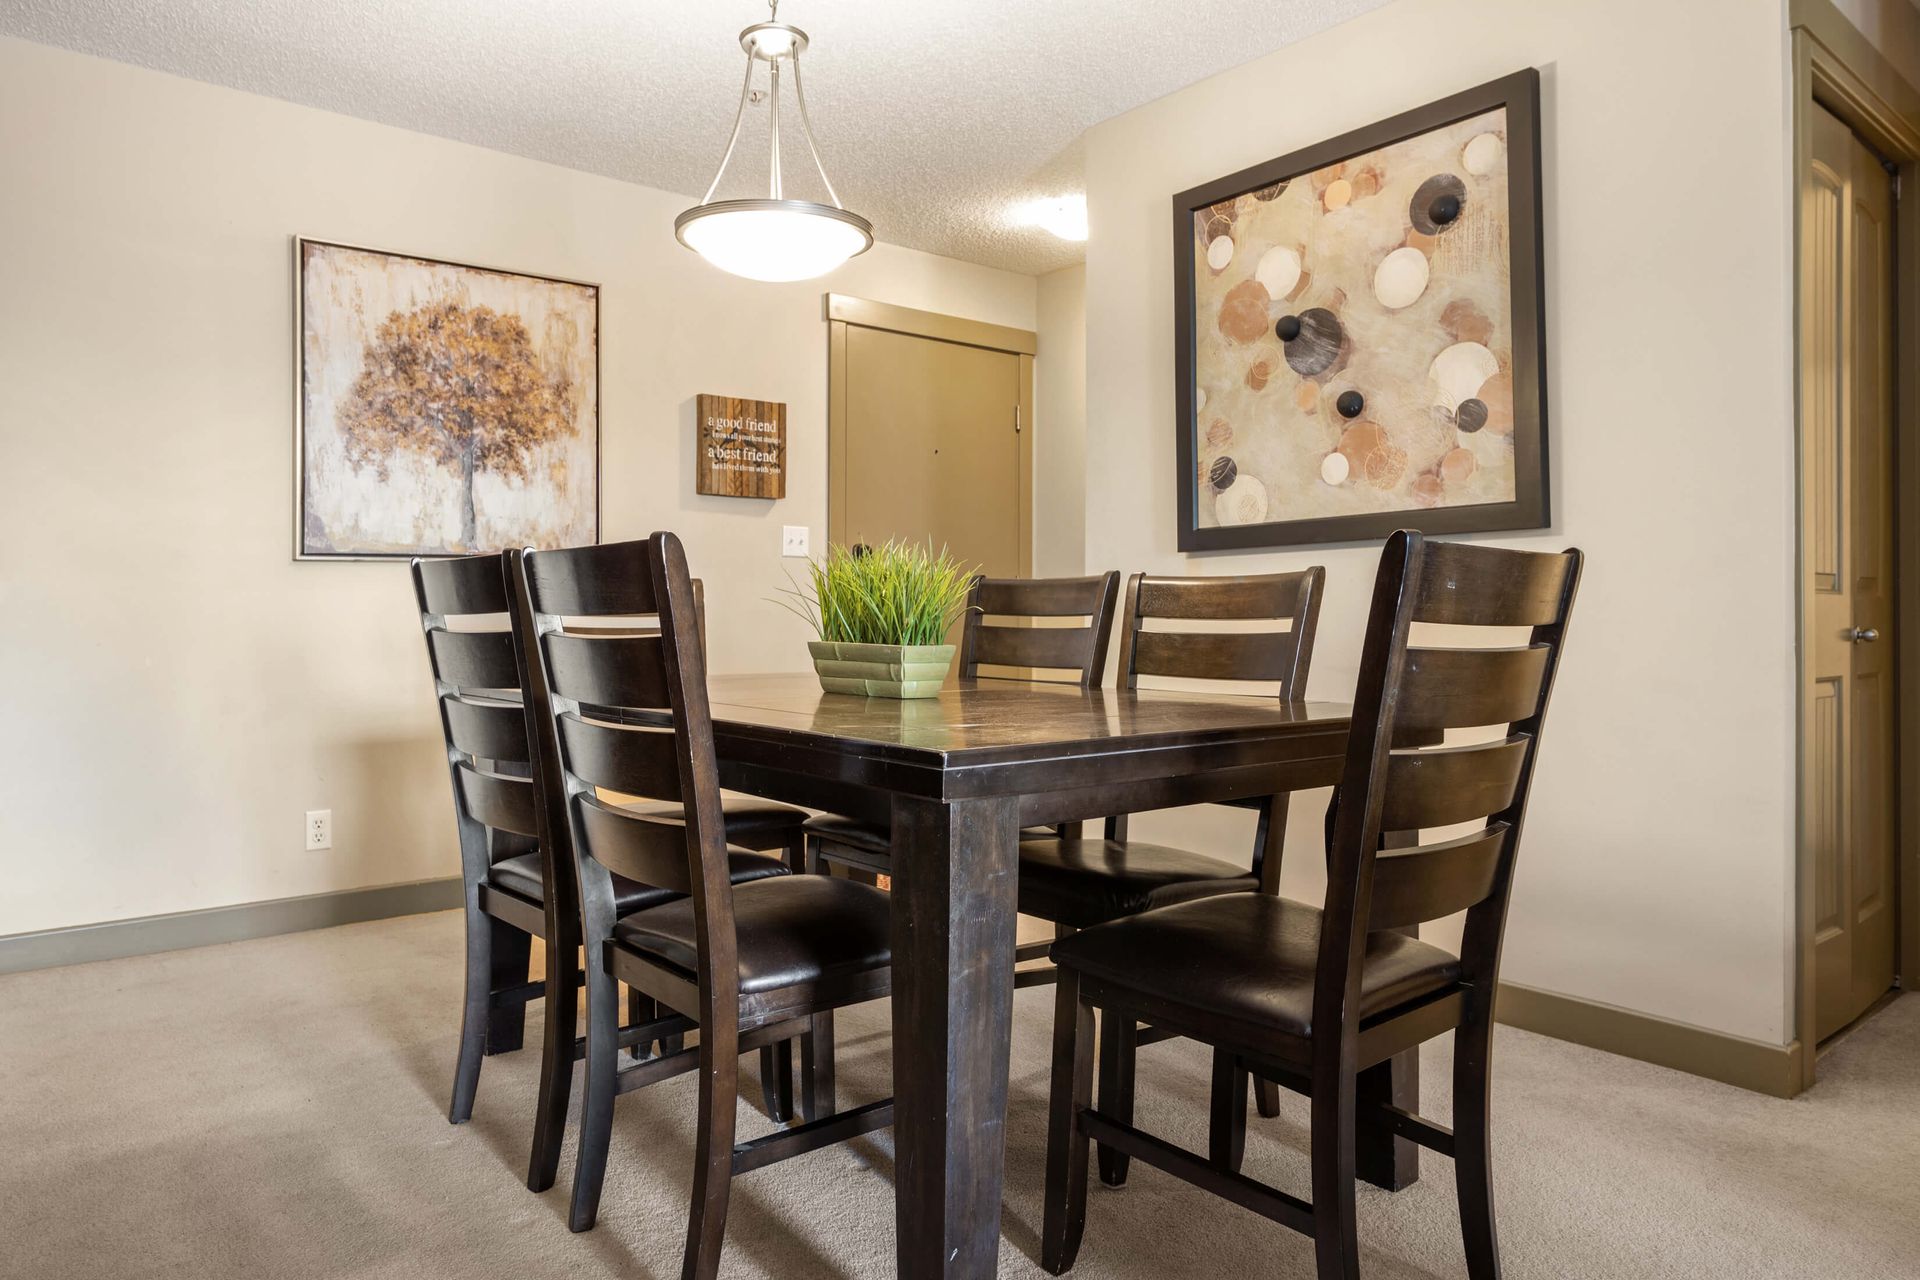 Dining area at the Lake Windermere Pointe Condos in Invermere, BC managed by Aisling Baile Property Management